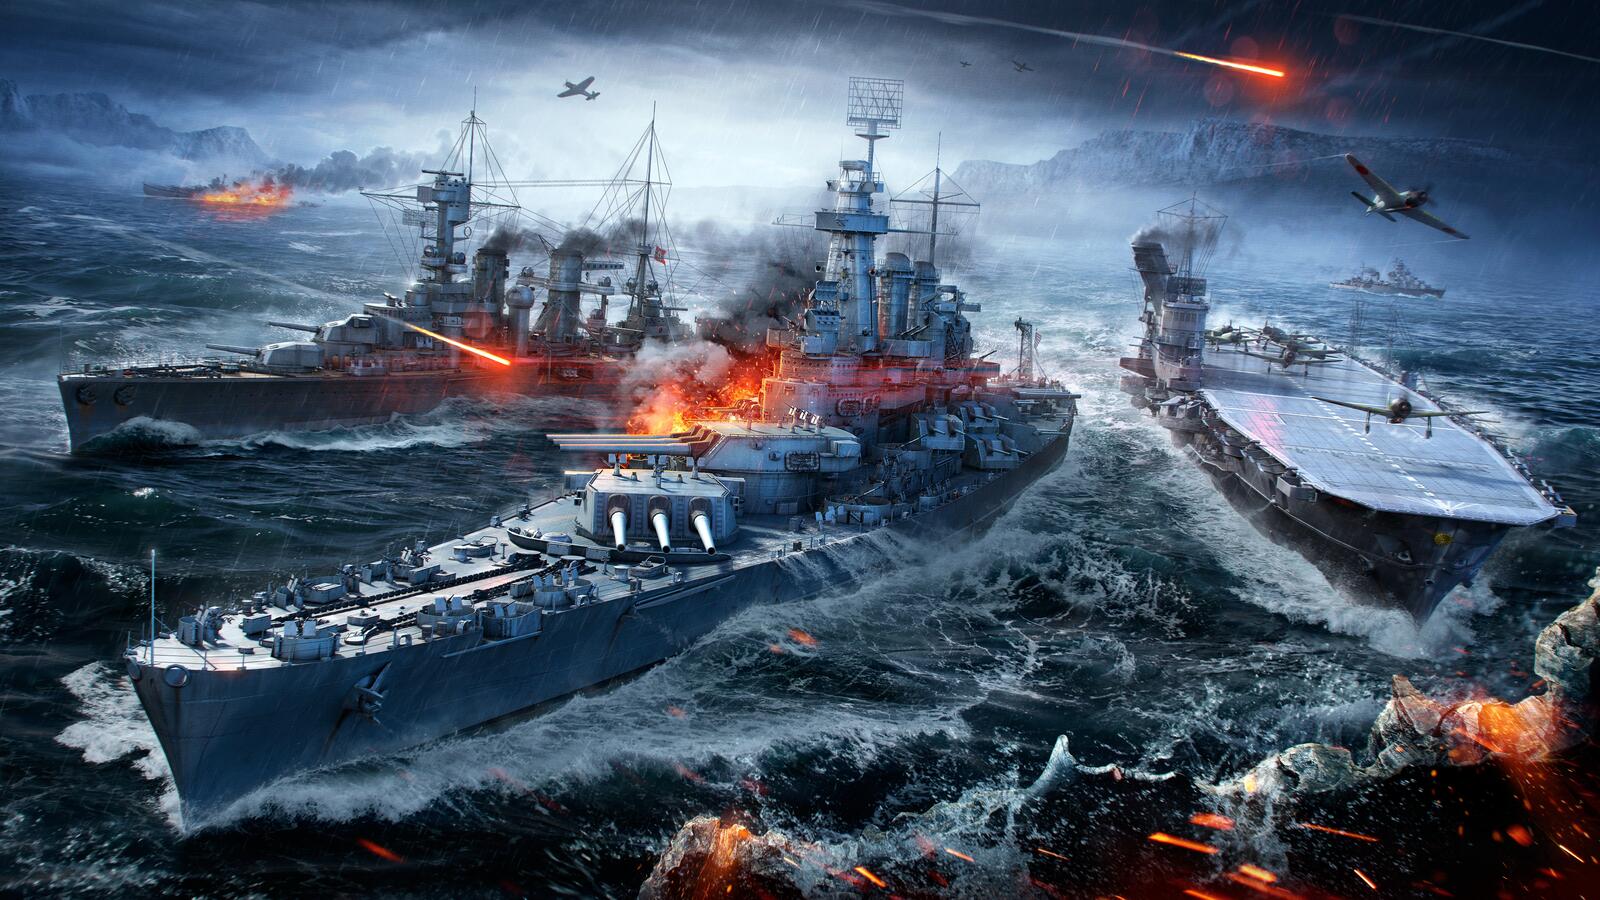 Wallpapers the world of warships battles marine on the desktop